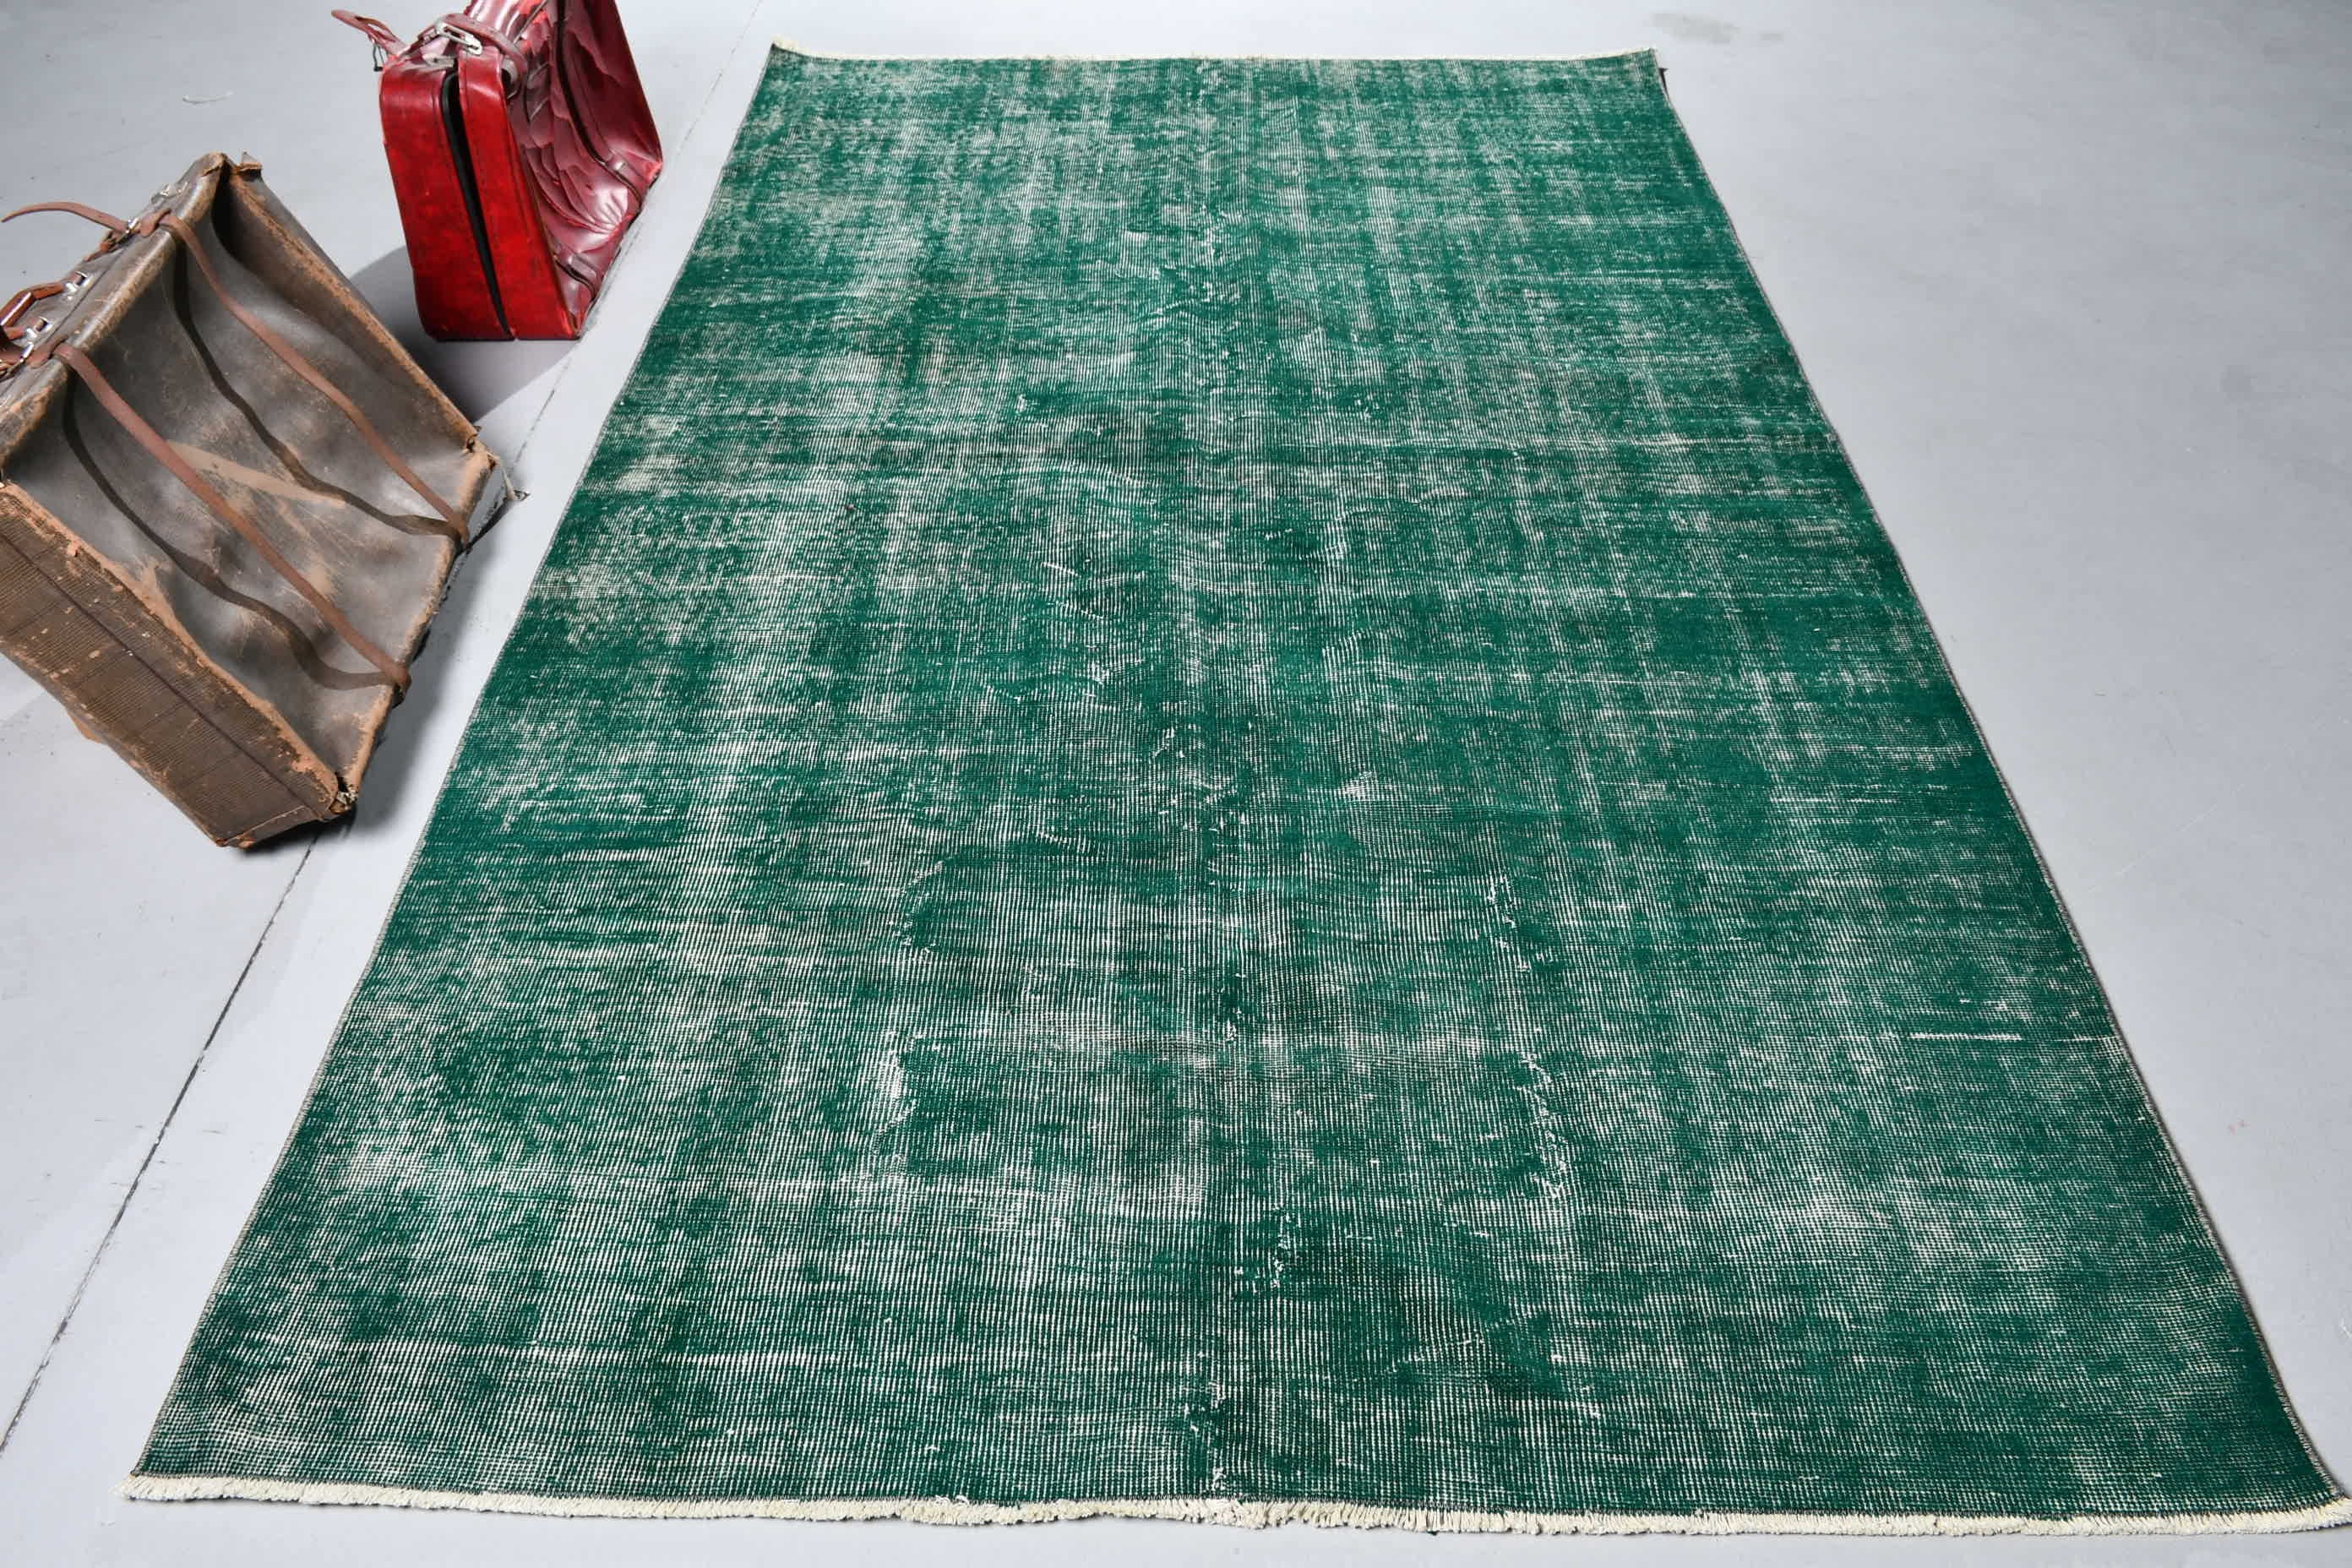 Bedroom Rug, Vintage Rug, Salon Rugs, Moroccan Rug, Old Rugs, Green Kitchen Rugs, Rugs for Dining Room, 5.6x9.4 ft Large Rugs, Turkish Rugs